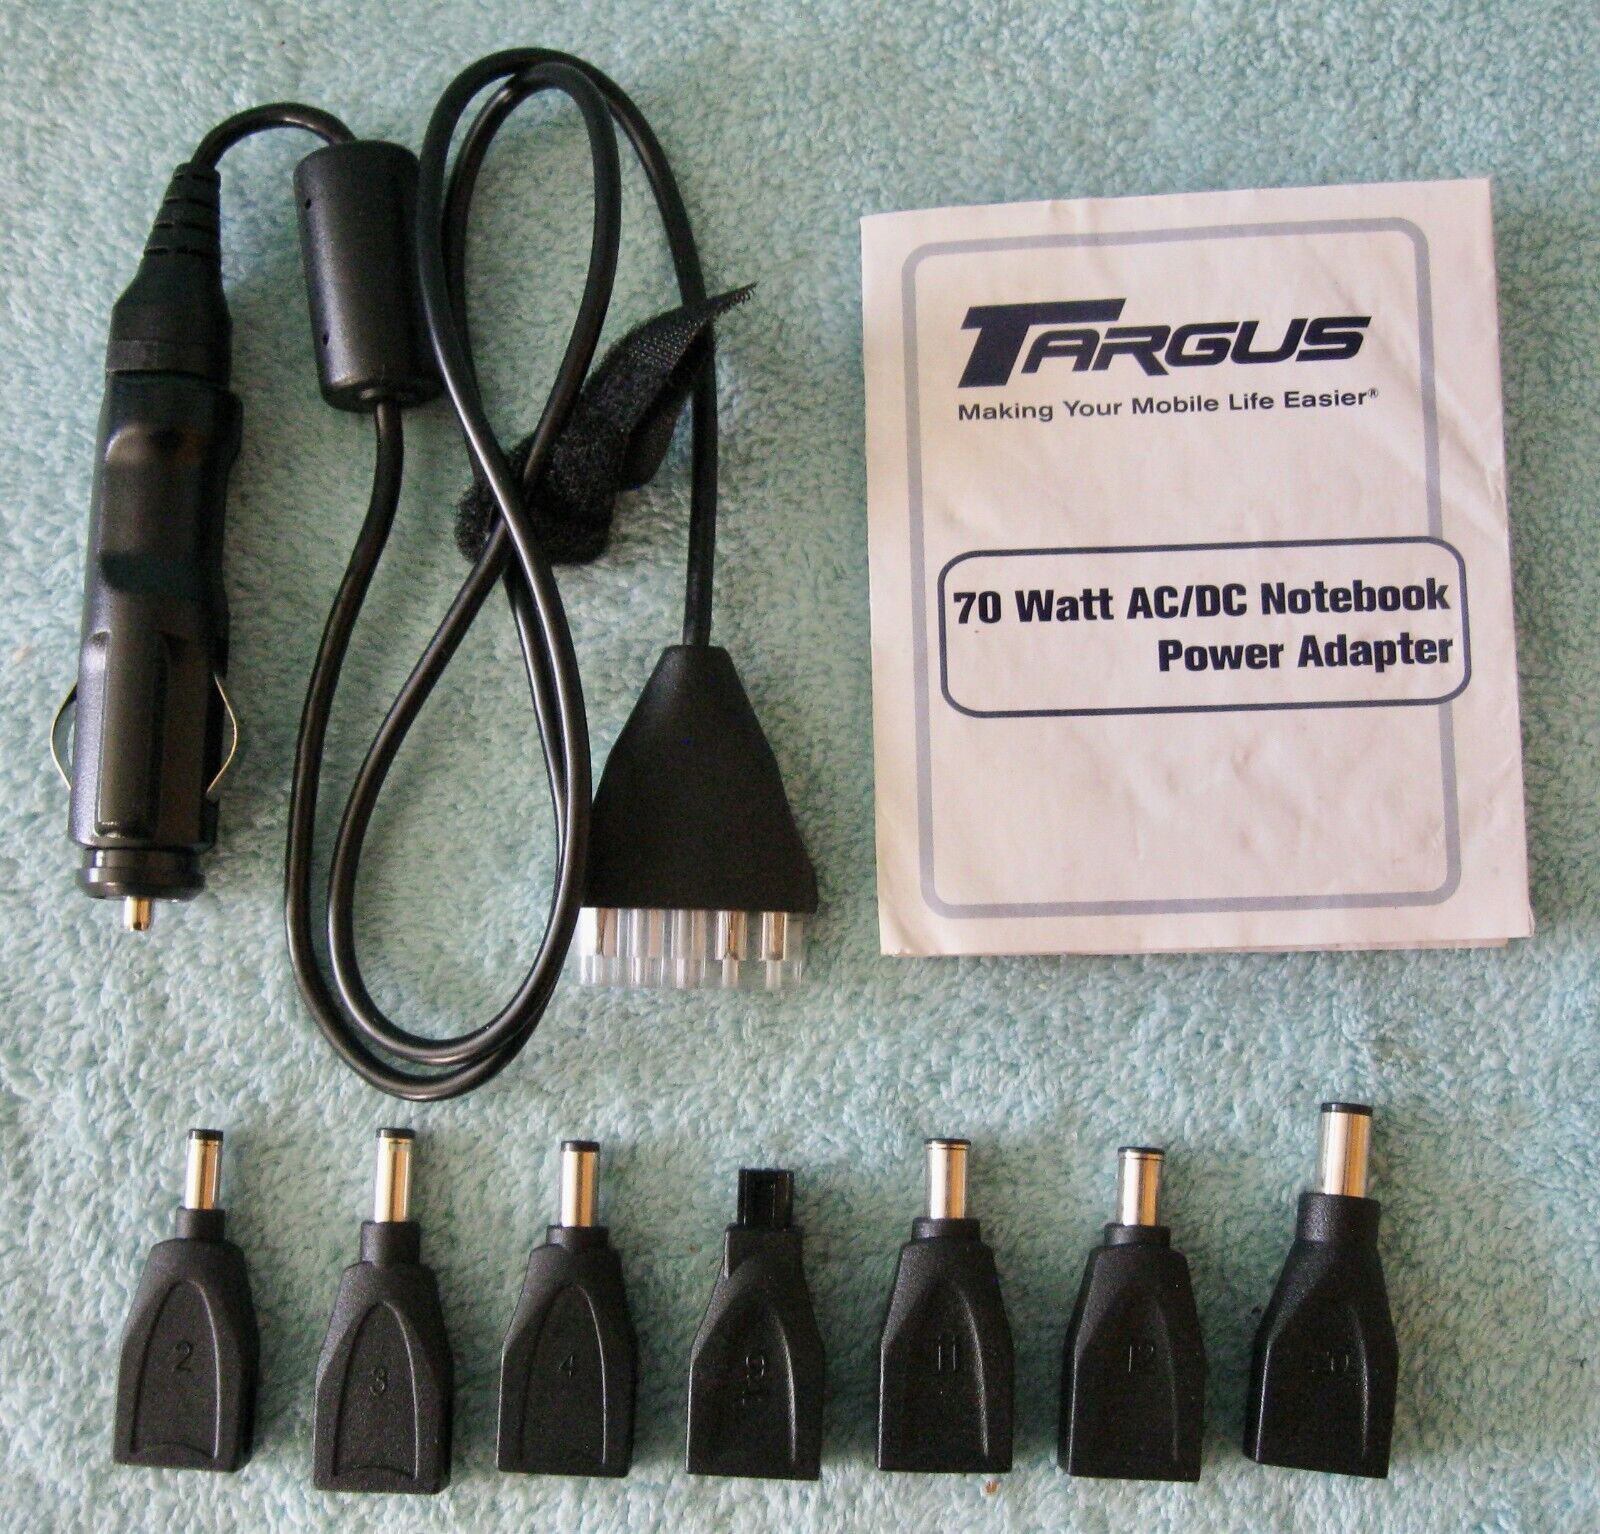 TARGUS?? Connector & Tips; Various Pieces & Parts